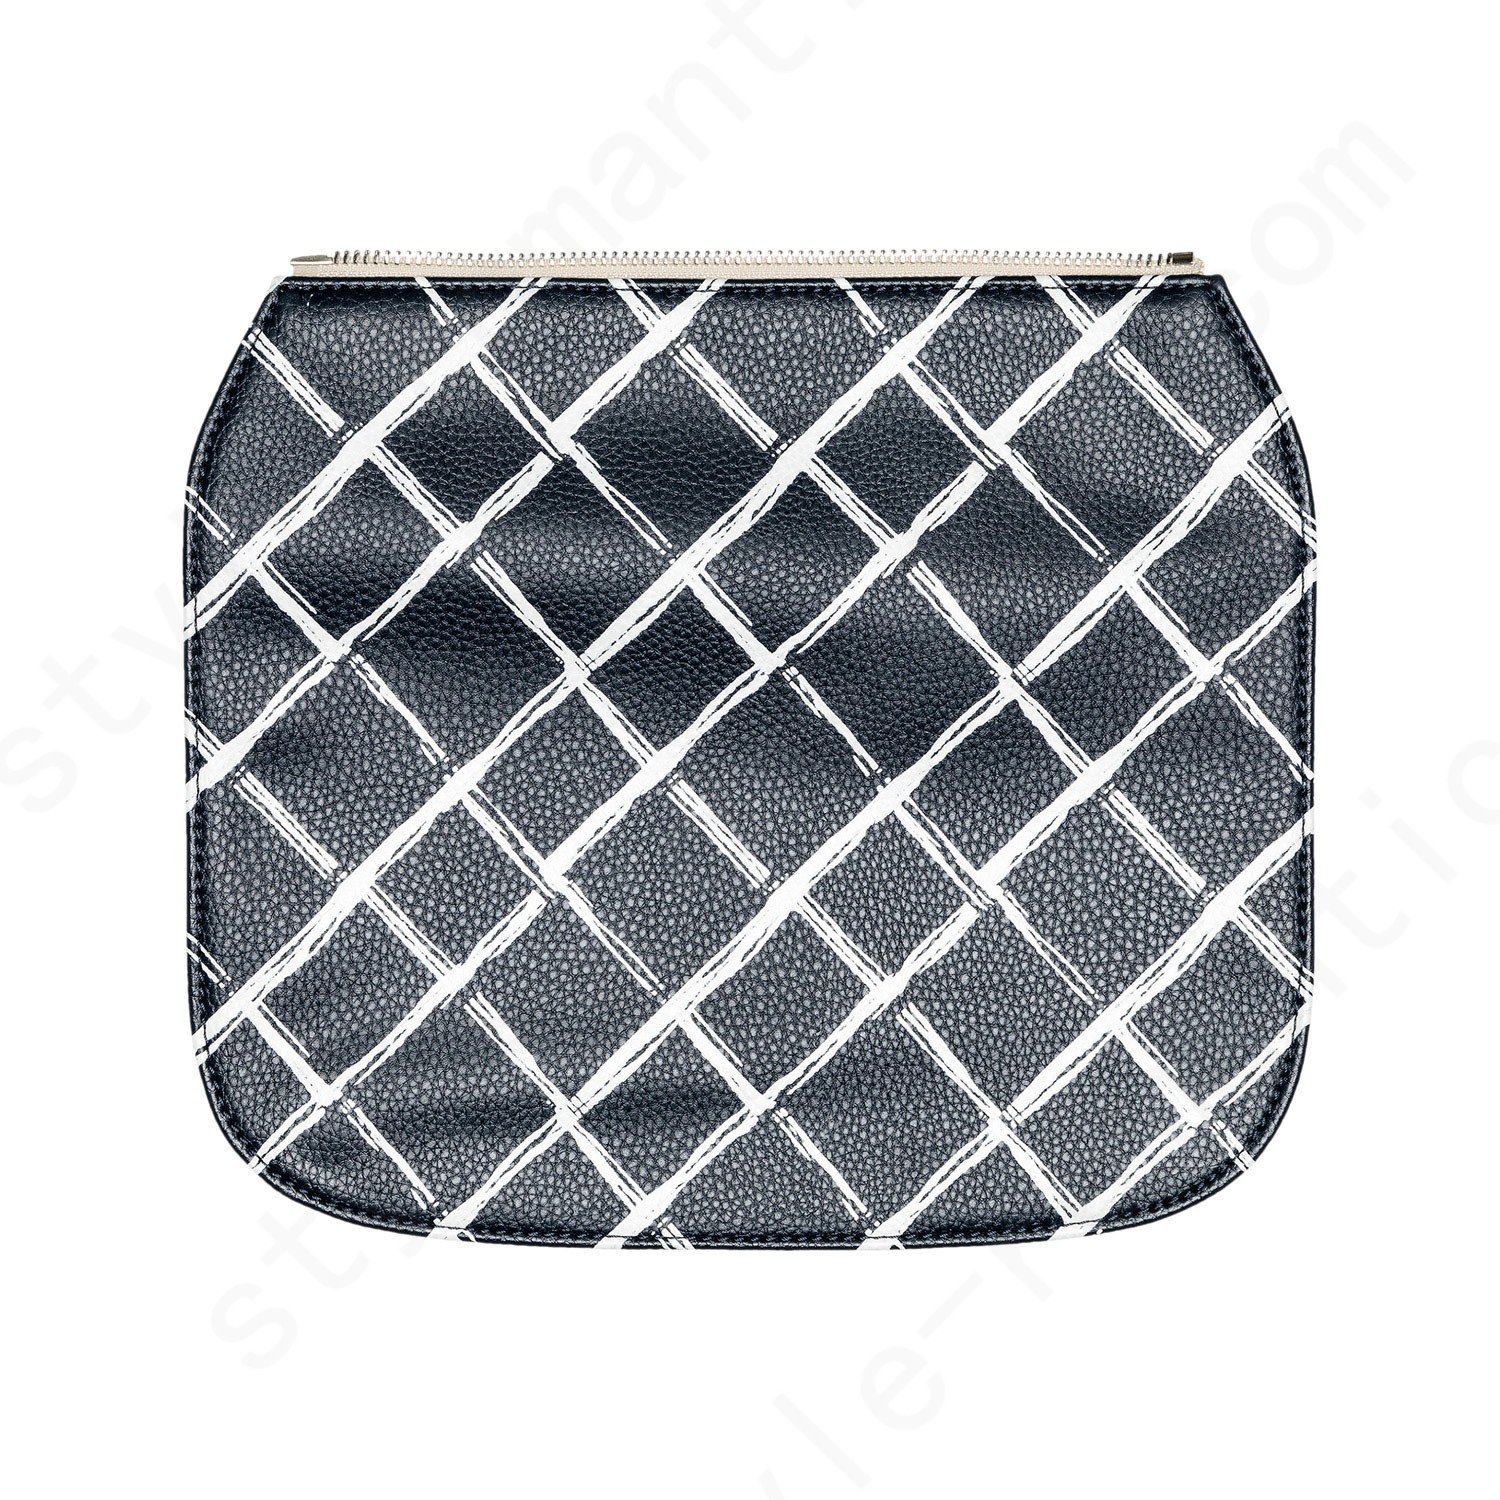 Thirty-One Gifts Studio Thirty-One Flap - Dash Of Plaid Pebble Bags Accessories - Thirty-One Gifts Studio Thirty-One Flap - Dash Of Plaid Pebble Bags Accessories